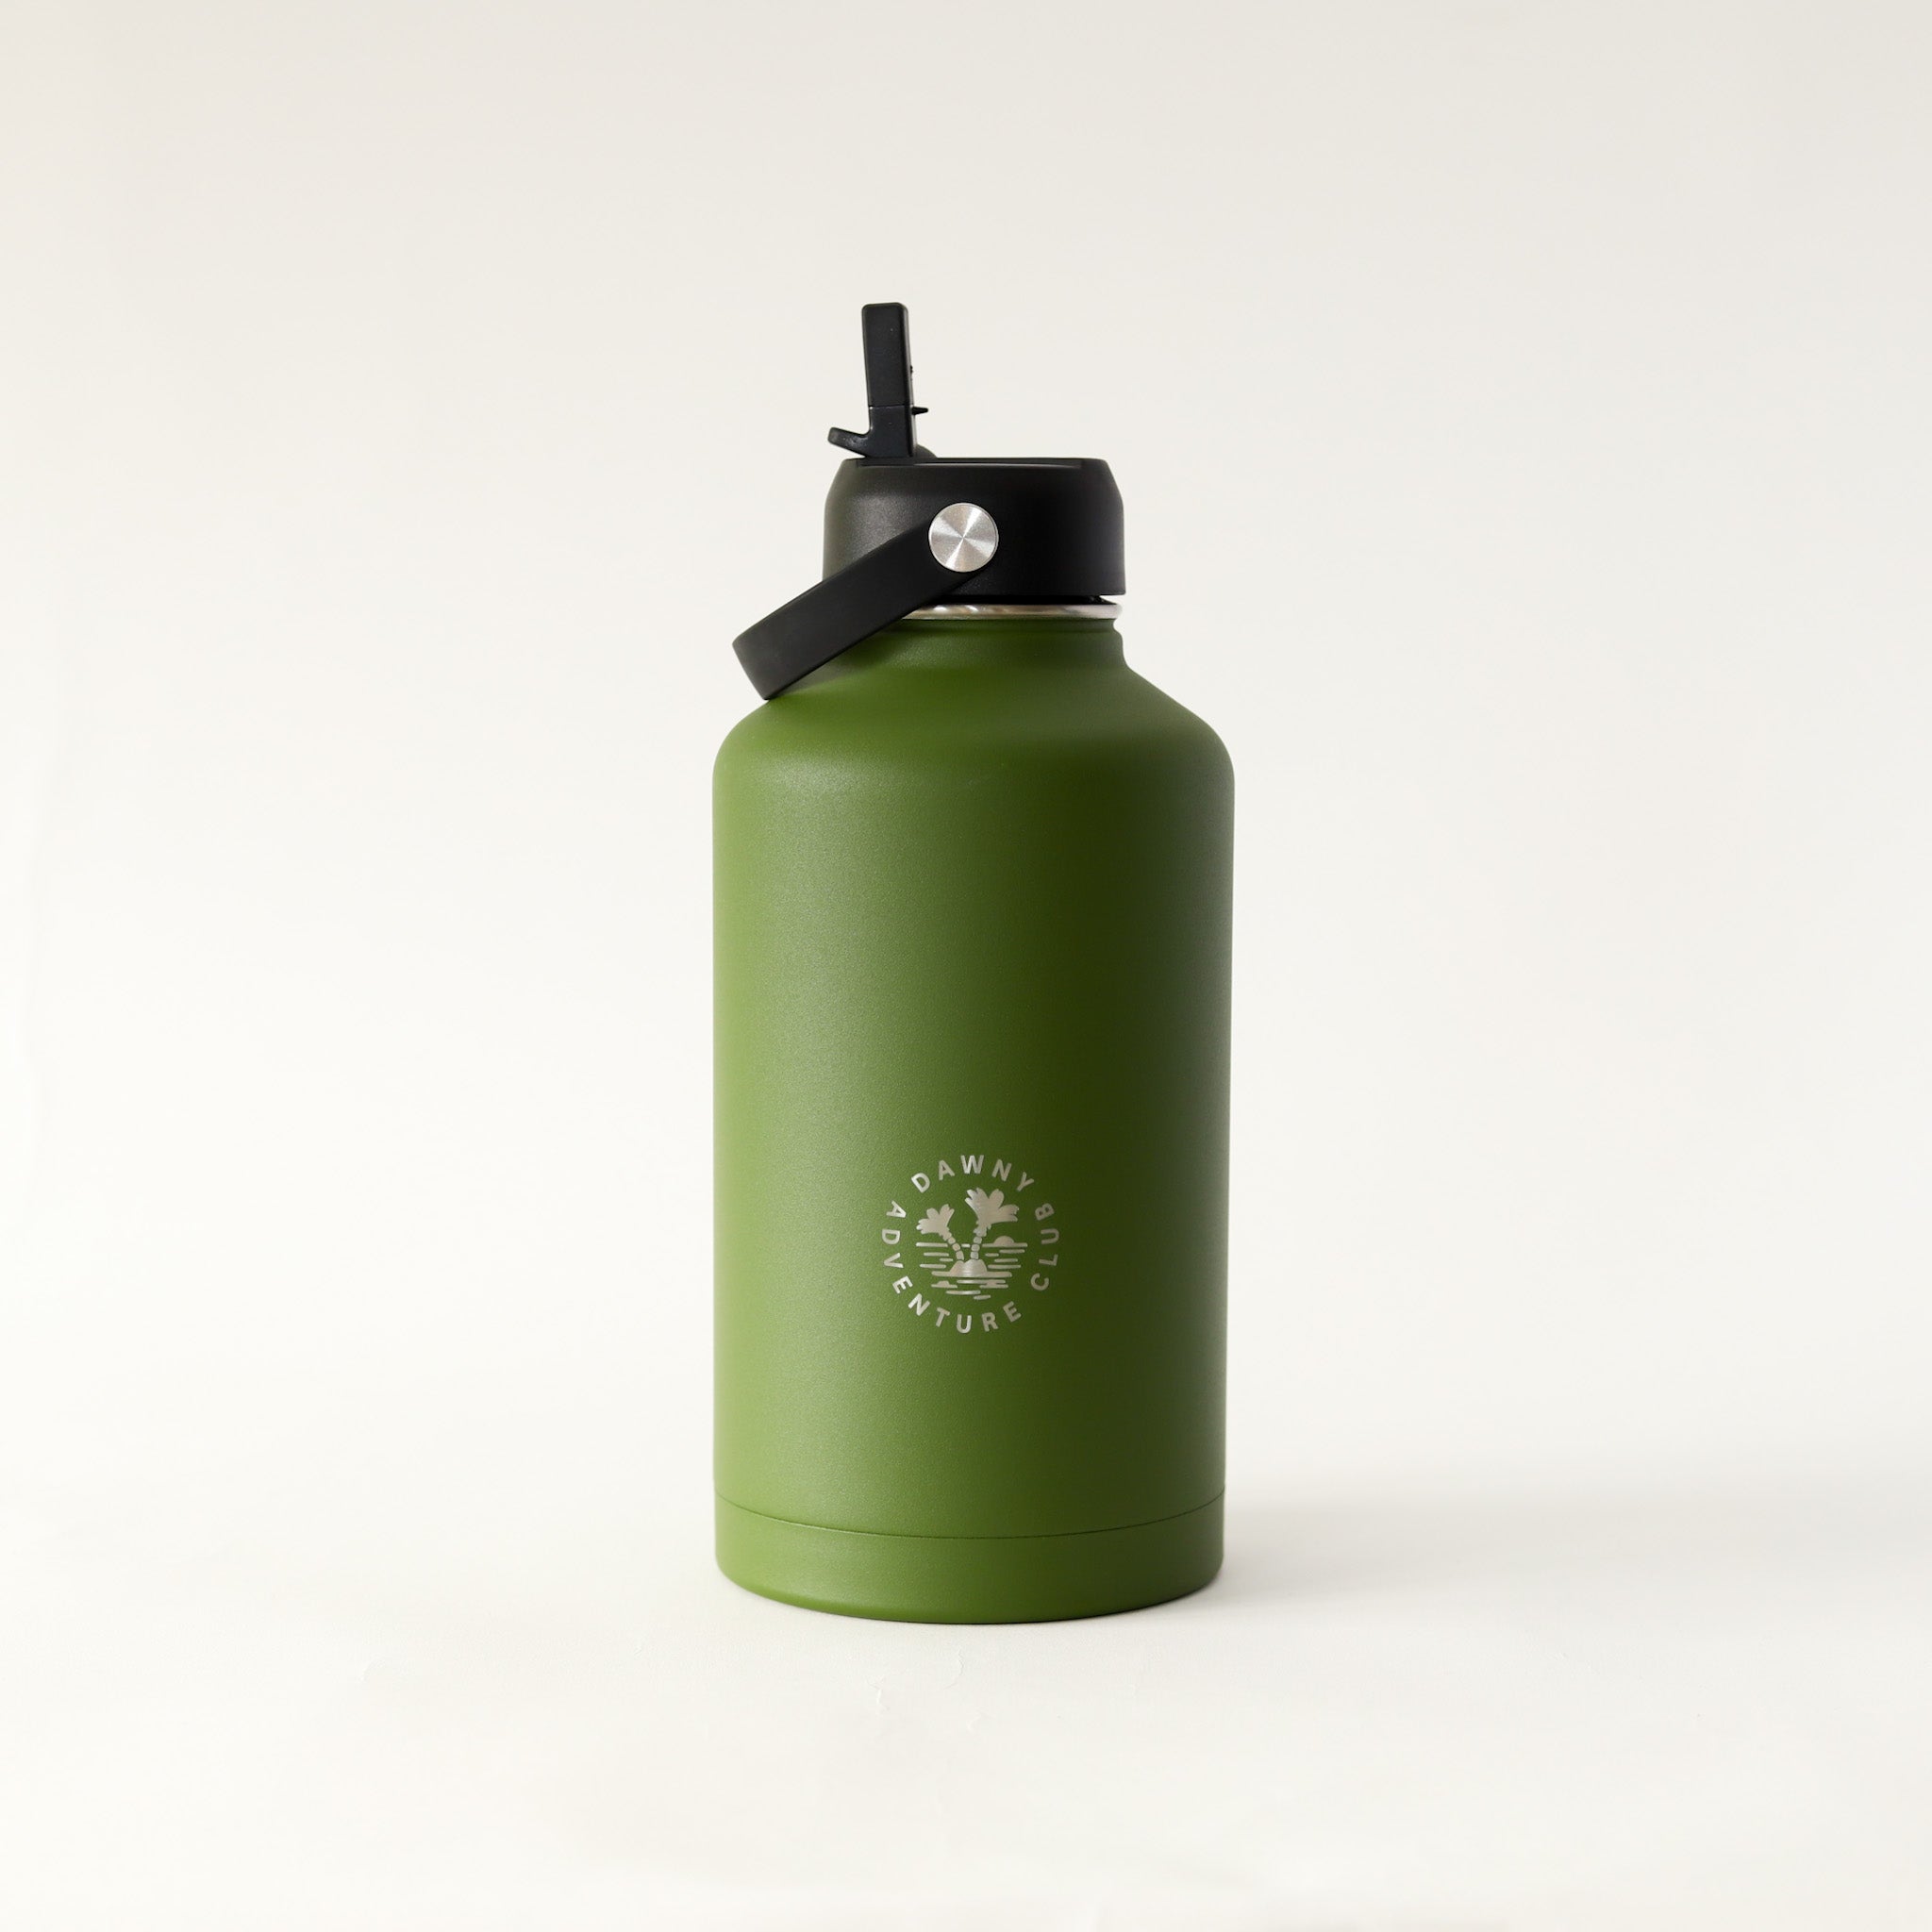 1900ml Moss Green Dawny Adventure Club Drink Bottle with sipper lid with swing handle